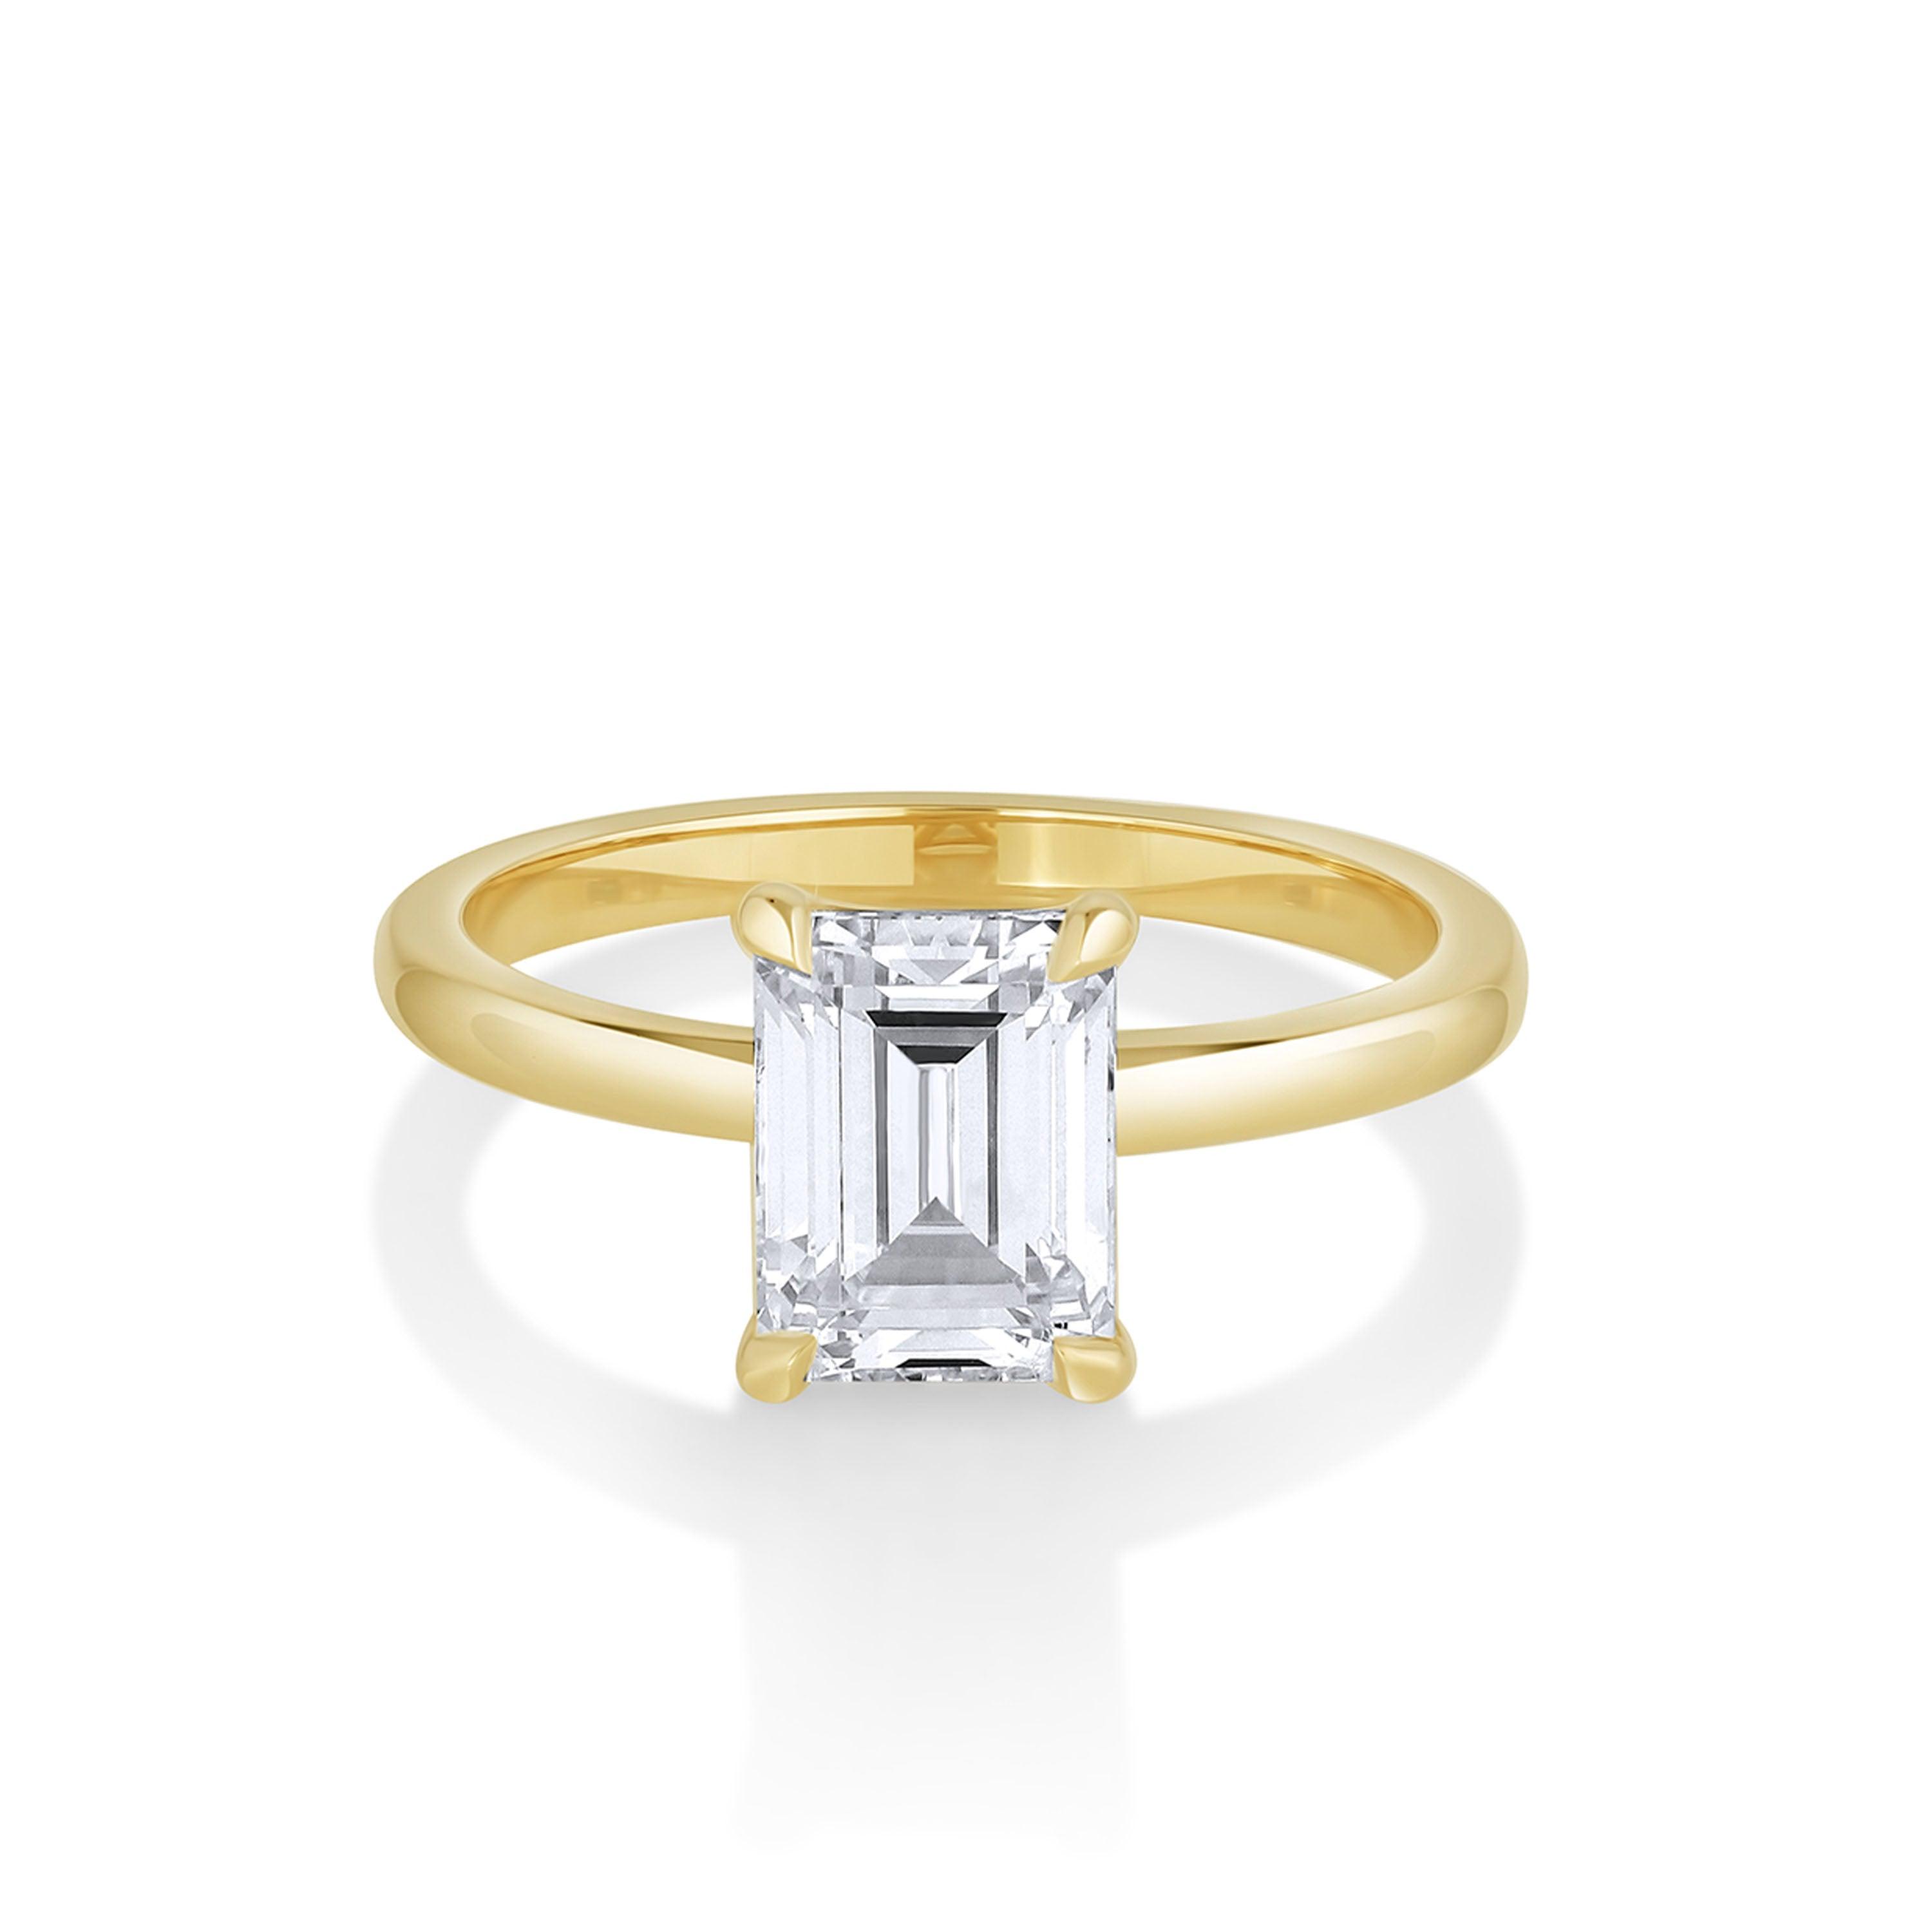 The Annette Engagement Ring – Marrow